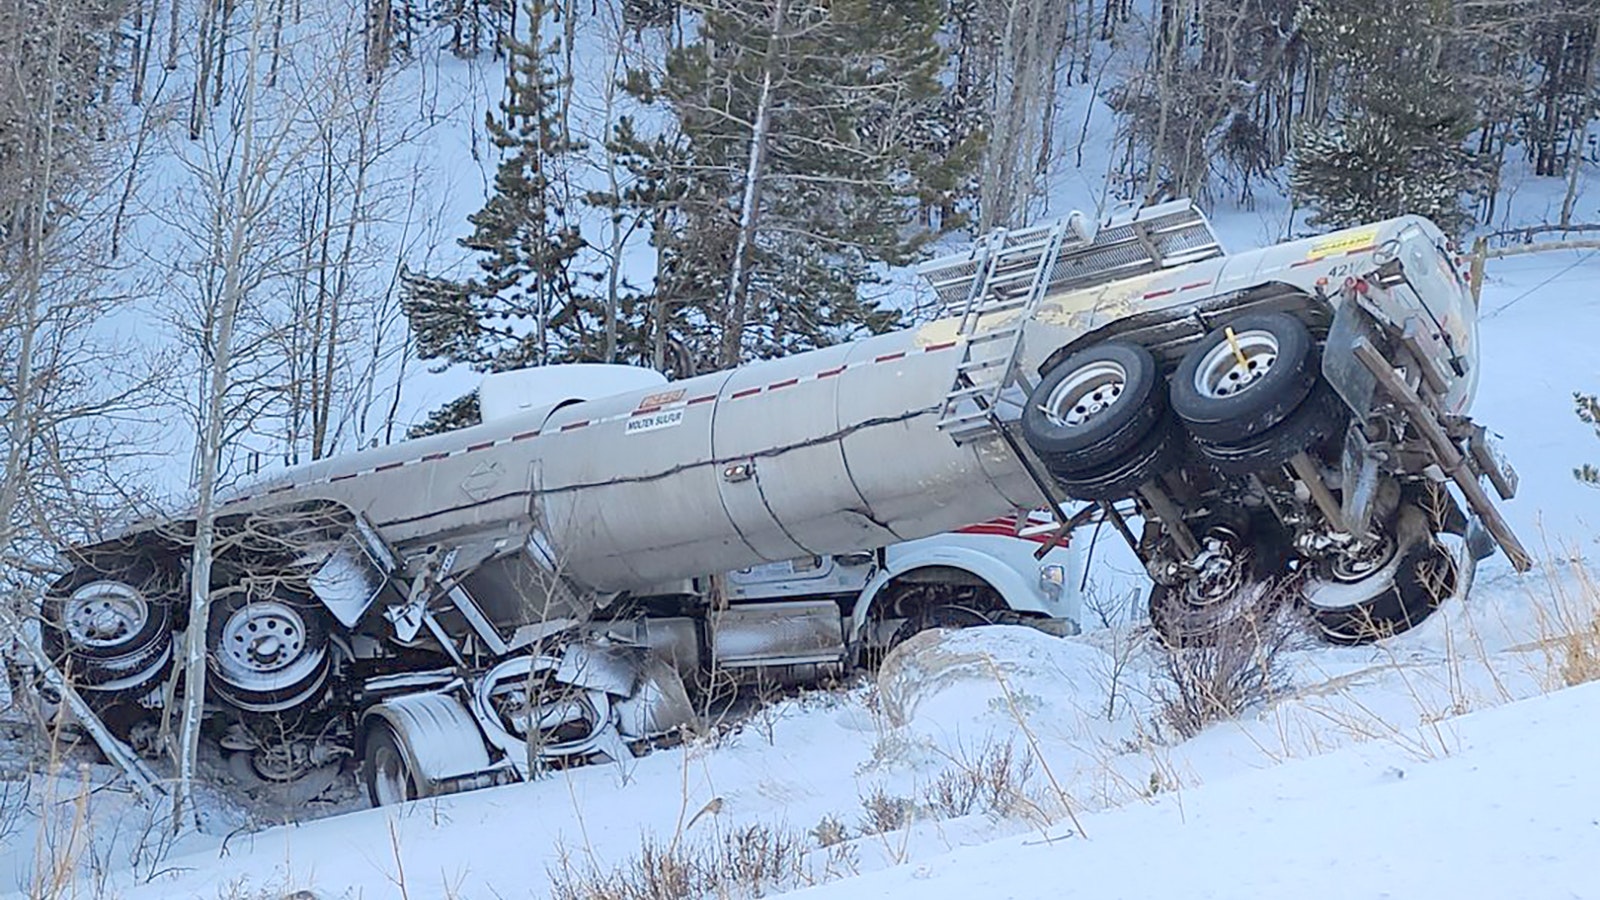 A semitrailer carrying 114,000 pounds of liquid sulfur slid off Highway 28 and down a 200-foot embankment during the Thanksgiving weekend blizzard.